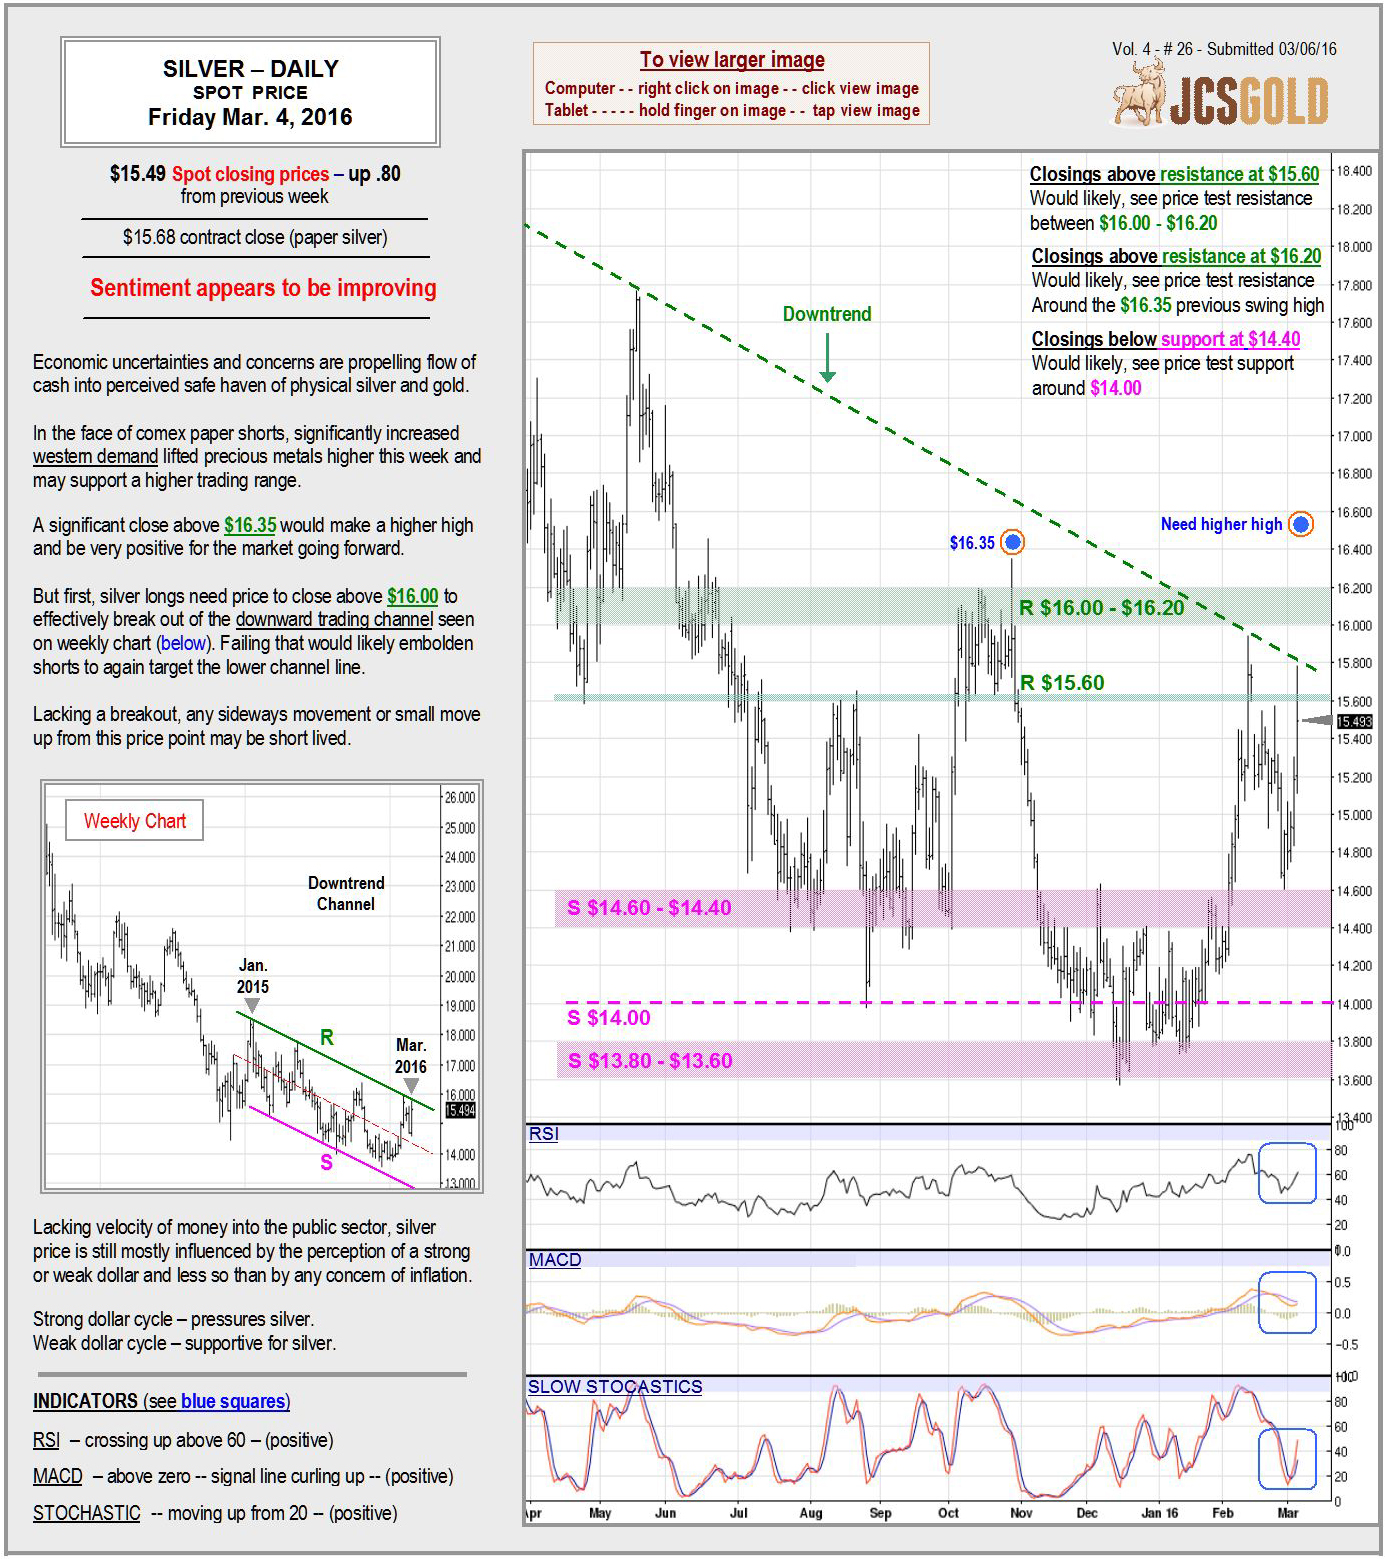 Mar 4, 2016 chart & commentary